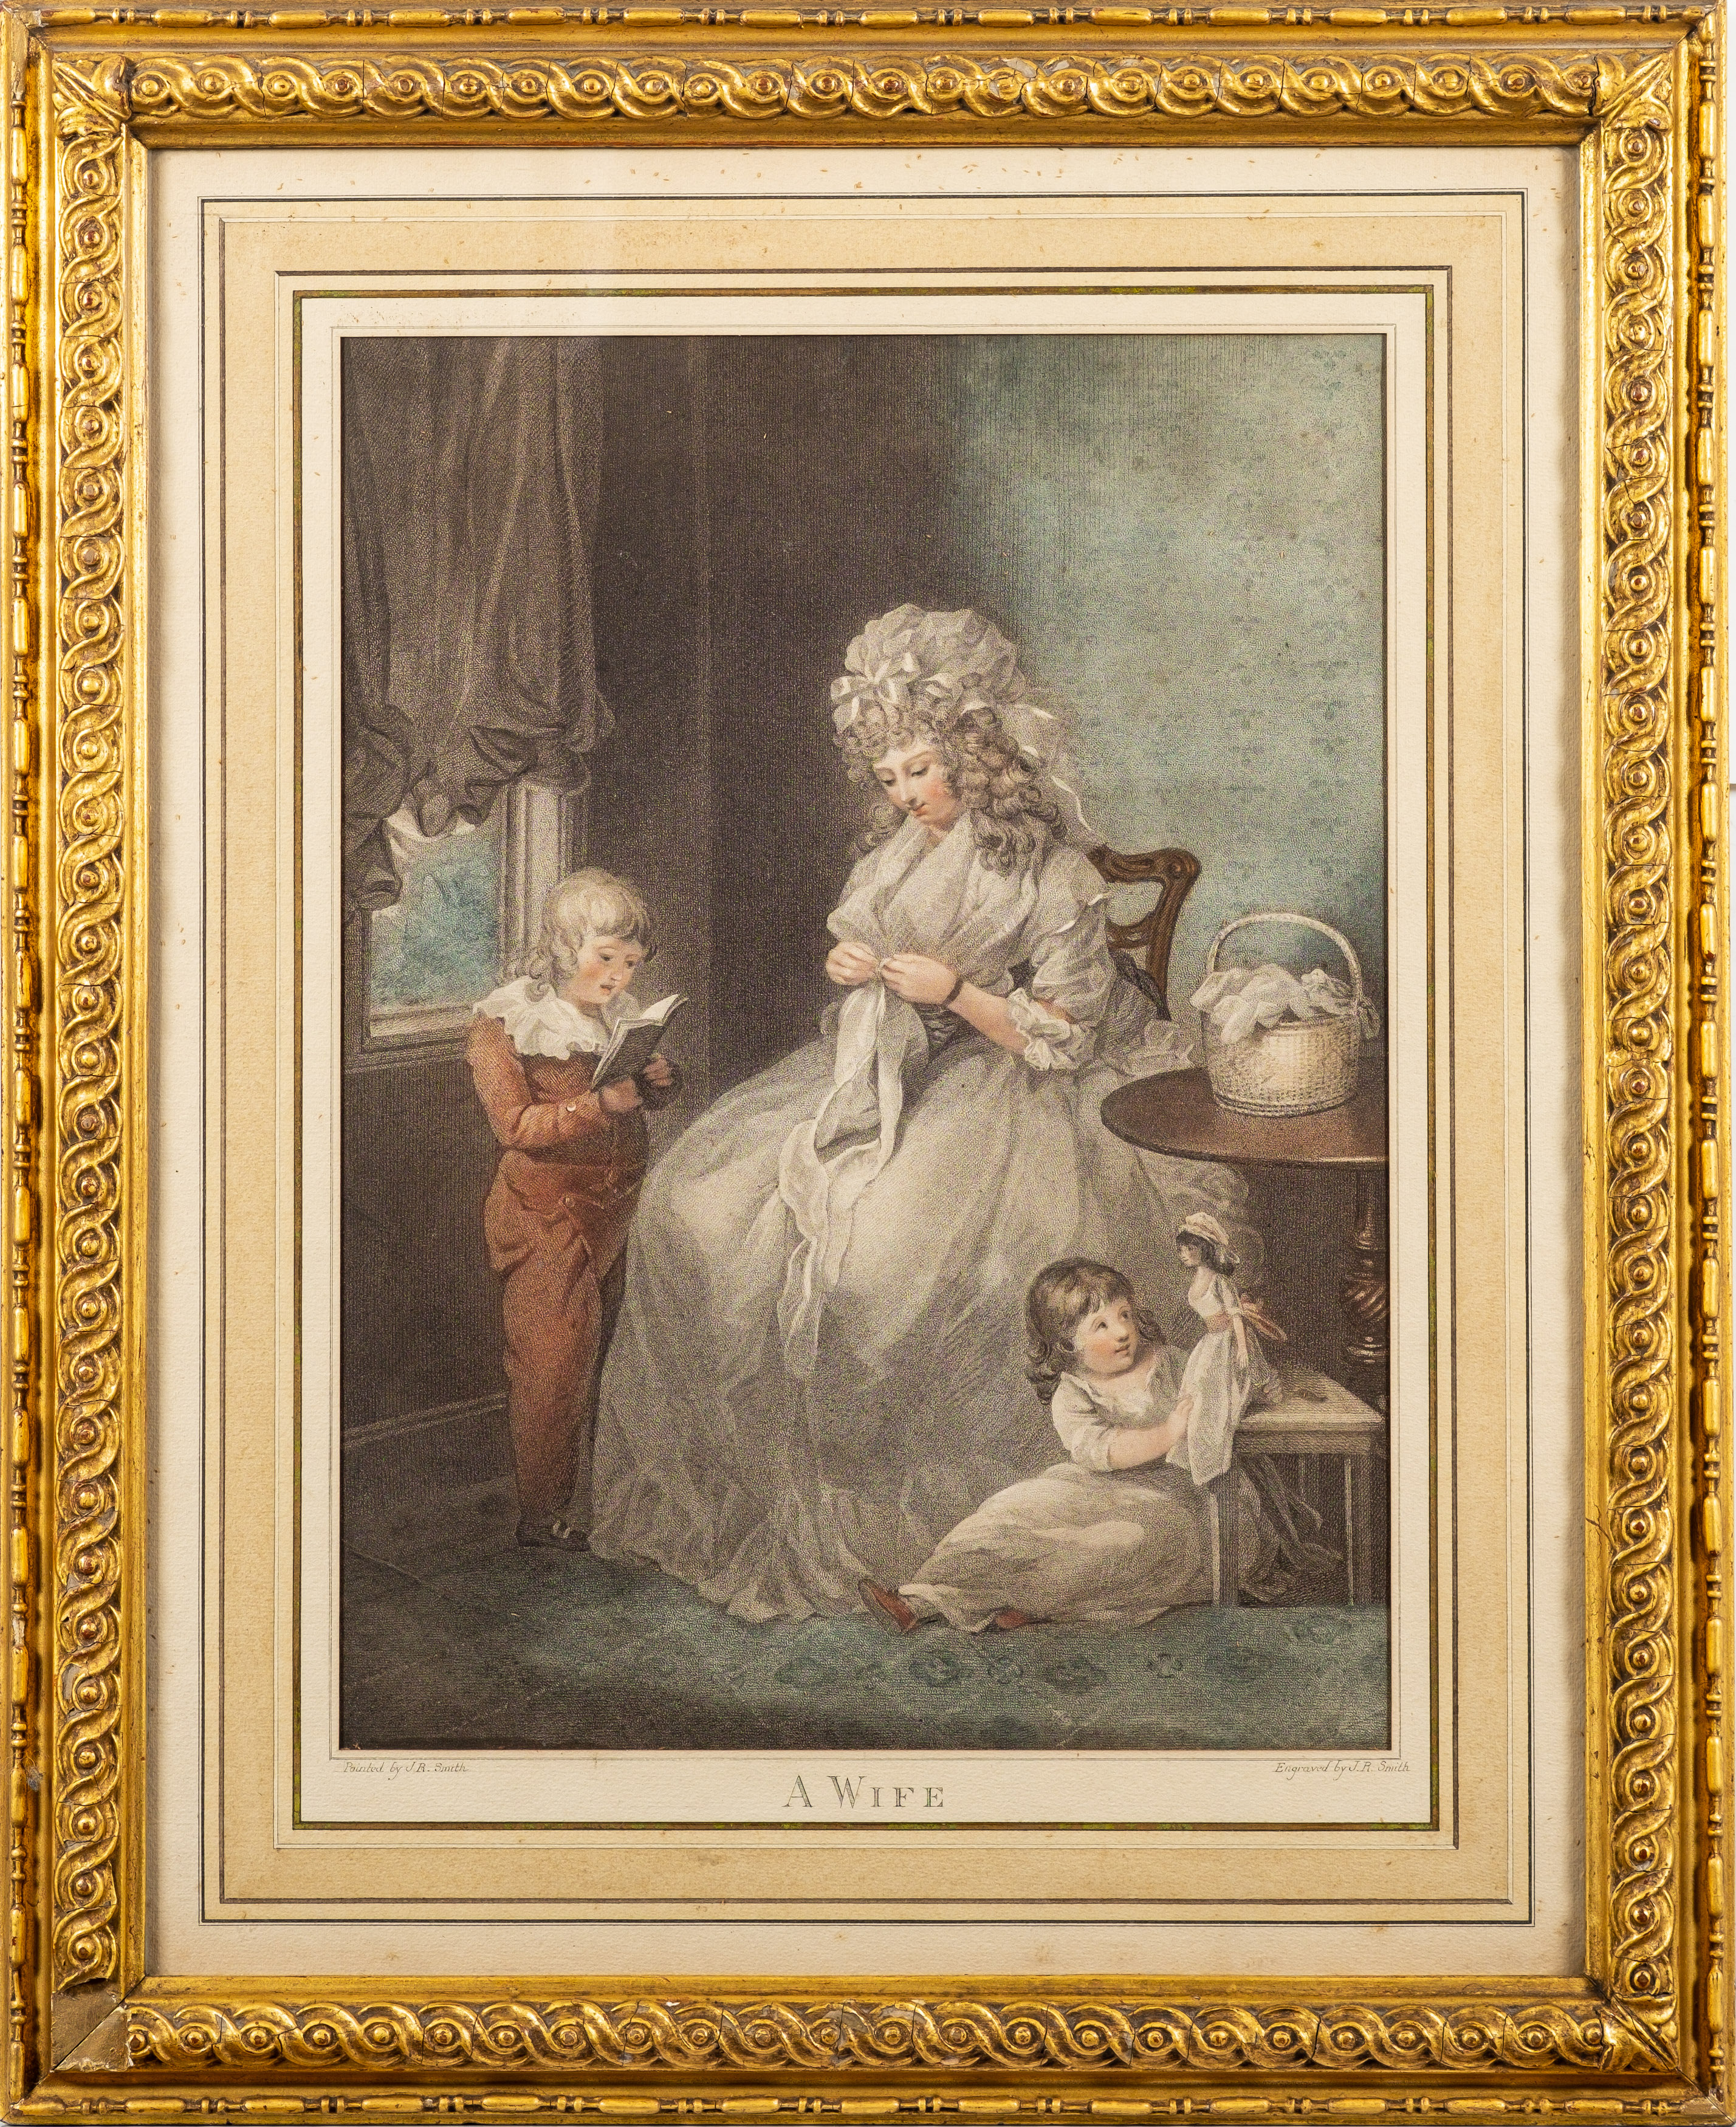 SMITH, J. R (engraver) " A Wife," hand coloured mezzotint after J. R.